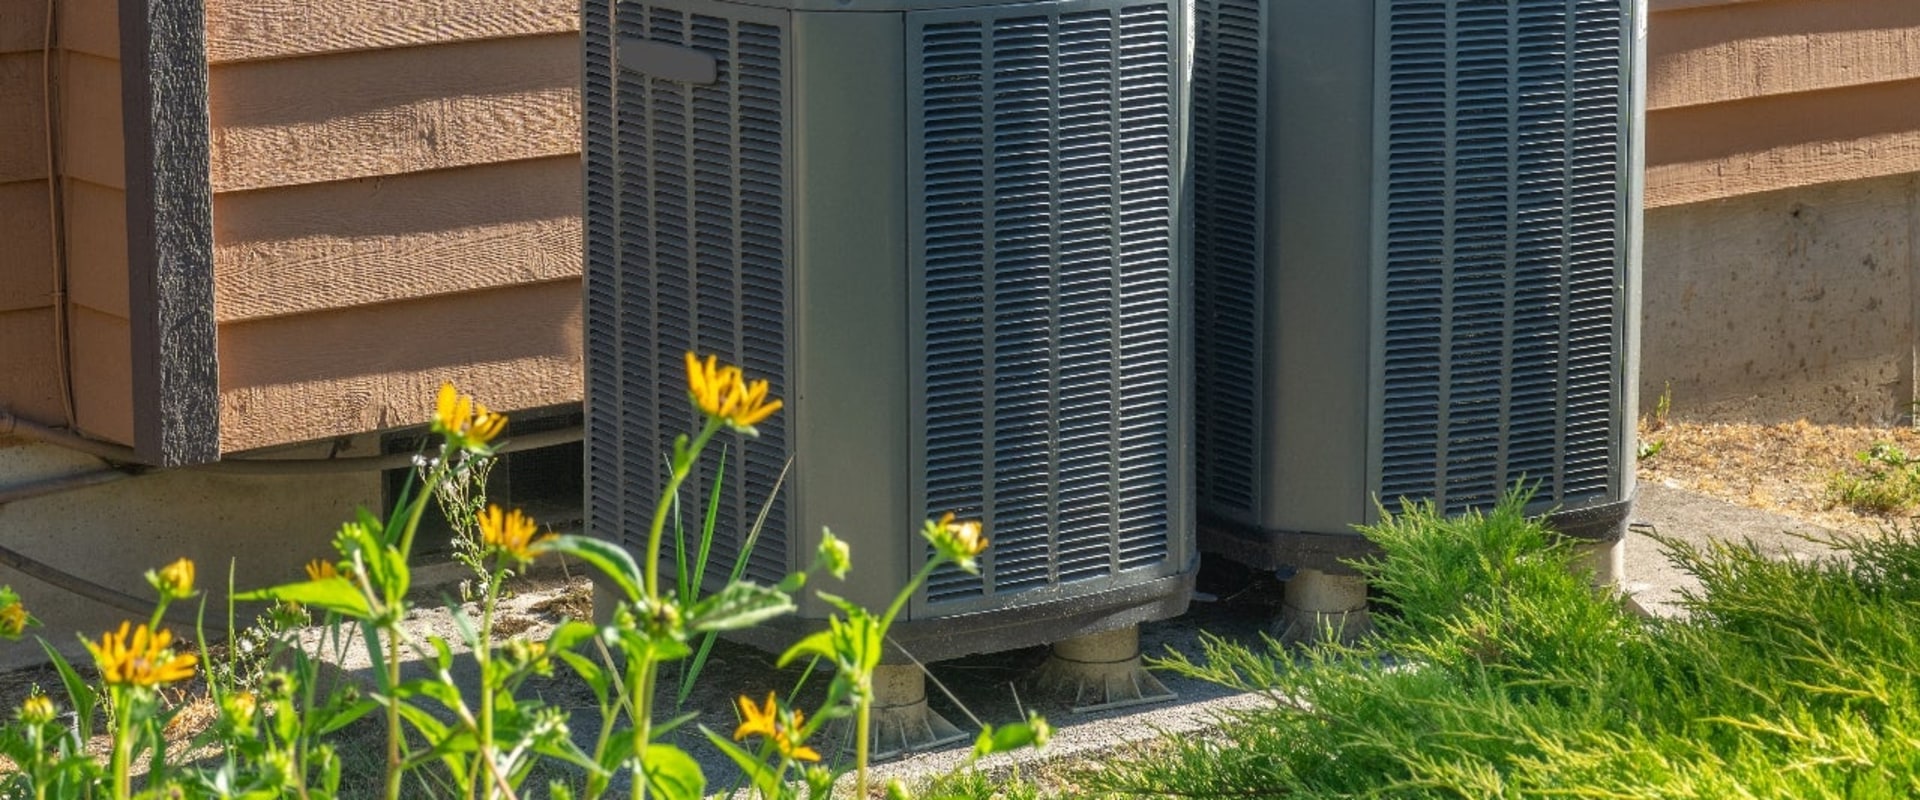 3 Essential Factors to Consider When Buying an Air Conditioner